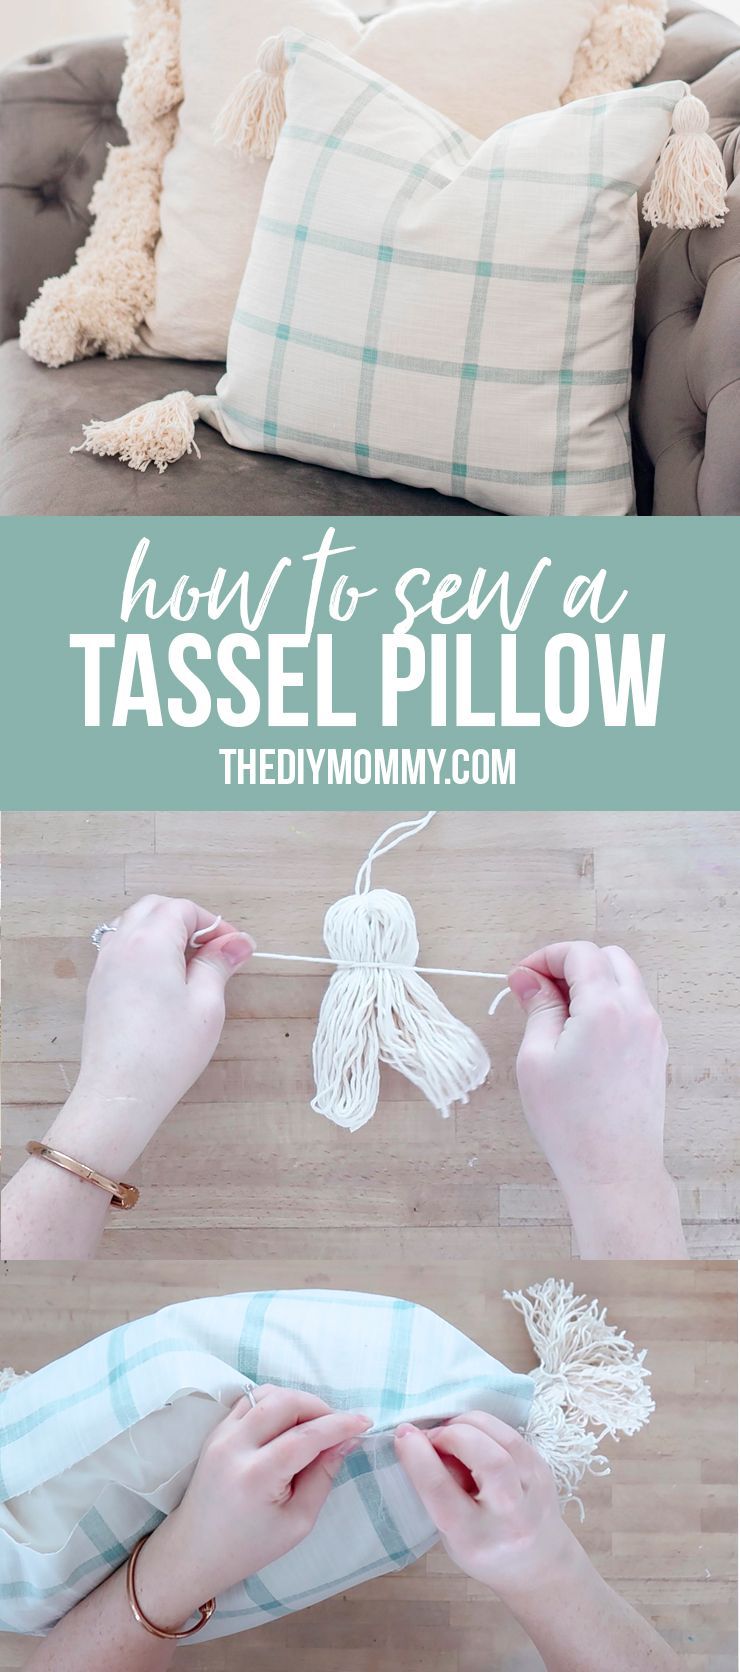 Sew a Tassel Pillow Cover | The DIY Mommy - Sew a Tassel Pillow Cover | The DIY Mommy -   18 diy Pillows decorative ideas